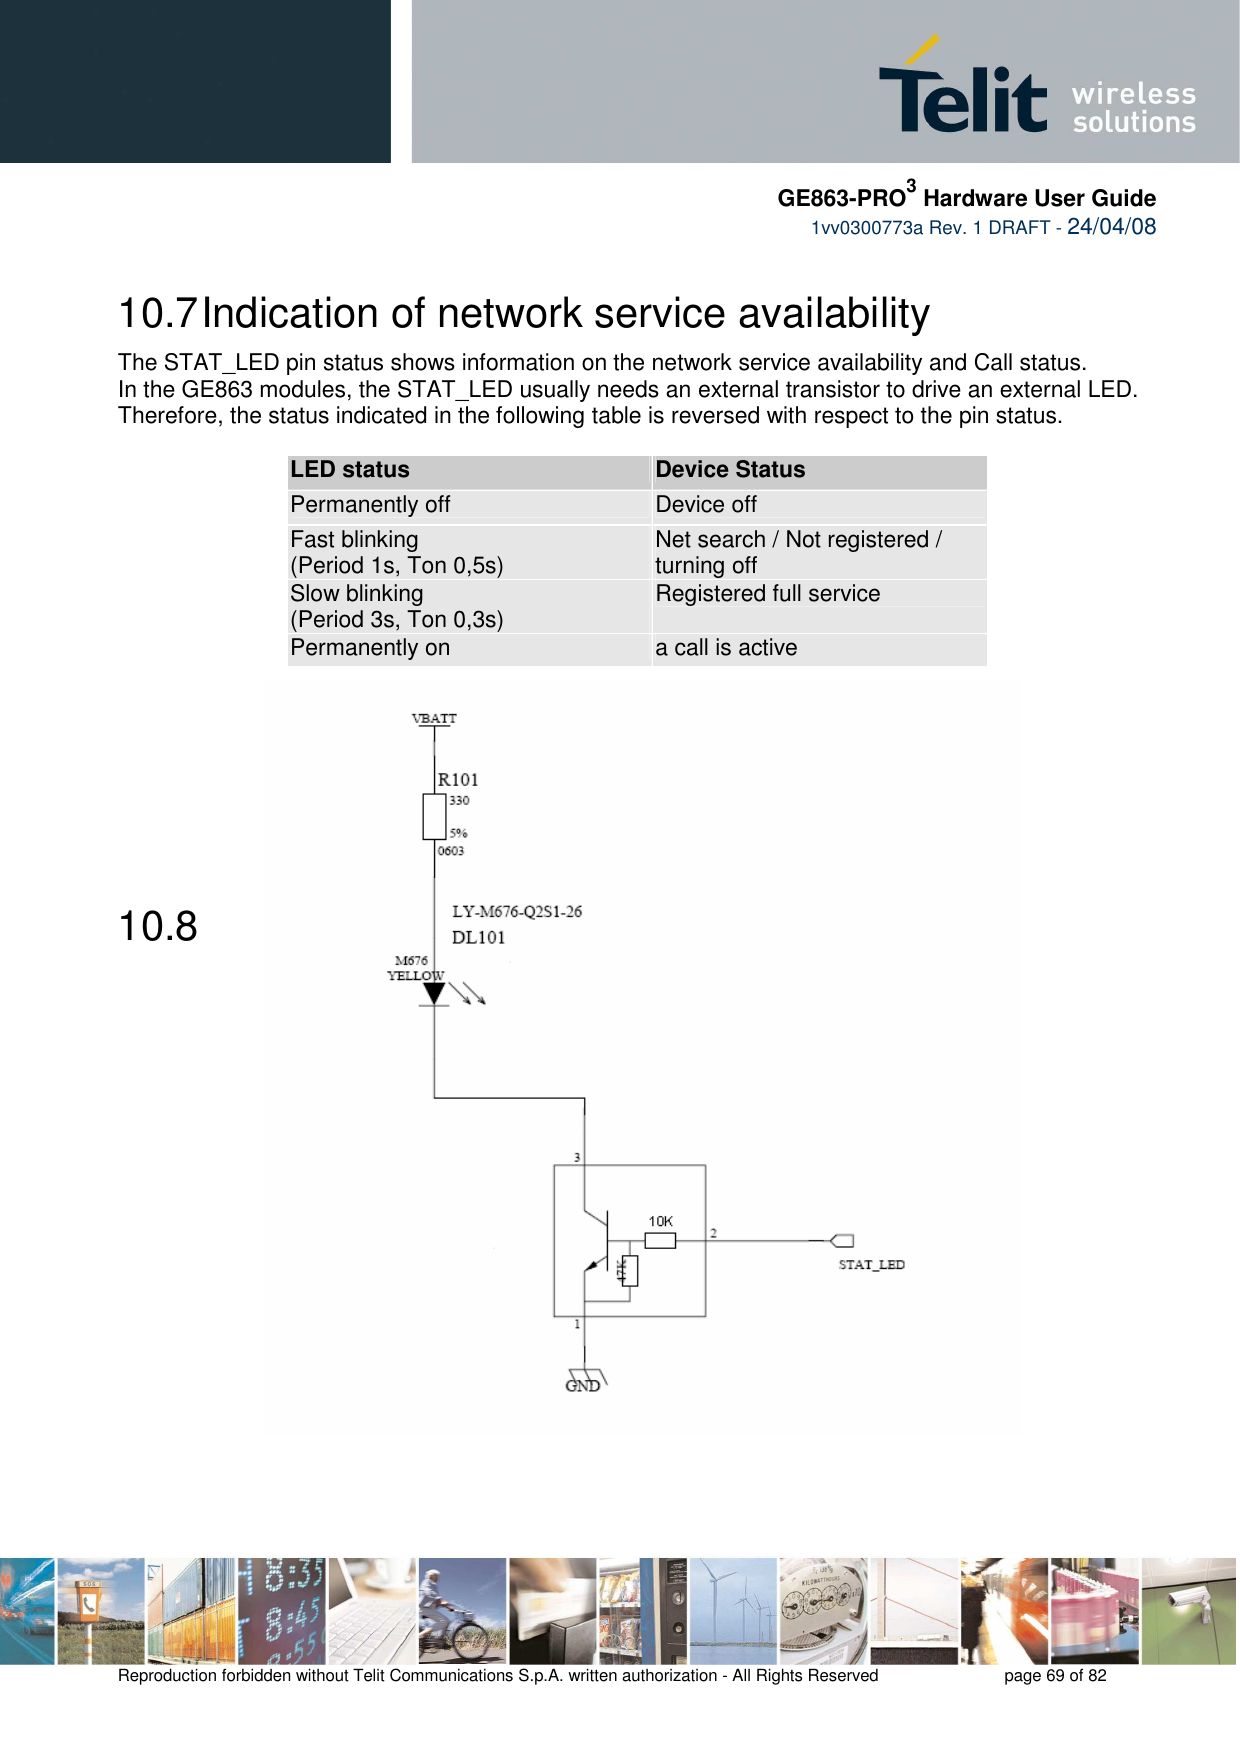     GE863-PRO3 Hardware User Guide  1vv0300773a Rev. 1 DRAFT - 24/04/08    Reproduction forbidden without Telit Communications S.p.A. written authorization - All Rights Reserved    page 69 of 82  10.7 Indication of network service availability The STAT_LED pin status shows information on the network service availability and Call status.  In the GE863 modules, the STAT_LED usually needs an external transistor to drive an external LED. Therefore, the status indicated in the following table is reversed with respect to the pin status.             LED status  Device Status Permanently off  Device off Fast blinking  (Period 1s, Ton 0,5s)  Net search / Not registered / turning off Slow blinking (Period 3s, Ton 0,3s)  Registered full service Permanently on  a call is active        10.8  